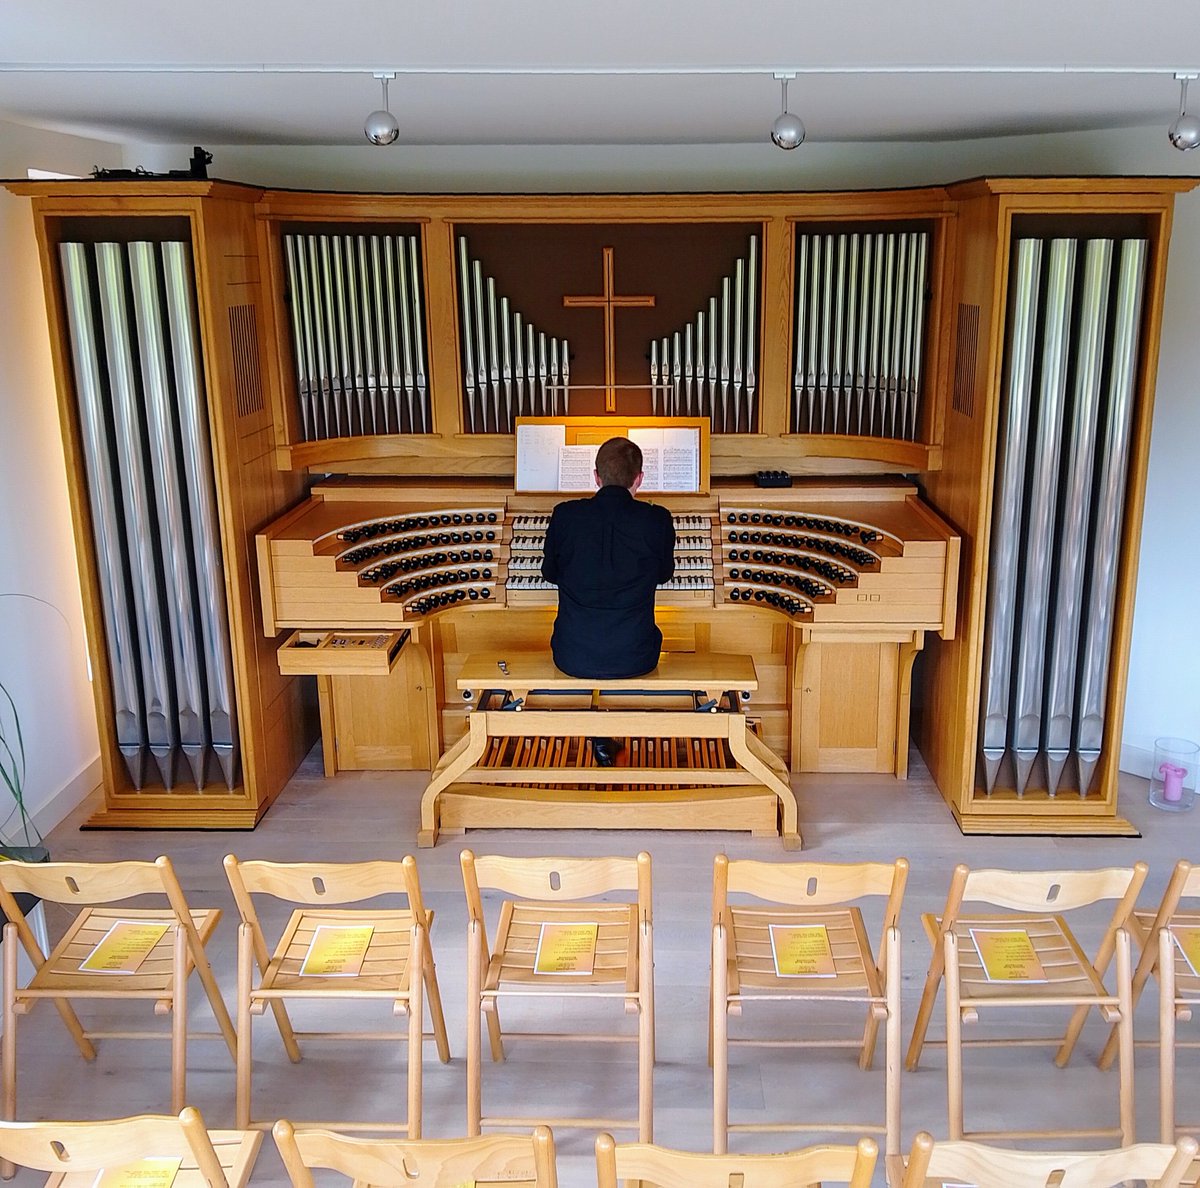 The front row of the audience has a great view tonight for Jonathan's concert on this amazing organ in a house!!! Looking forward to performing a Hausorgelkonzert! will definitely be a full house!!!